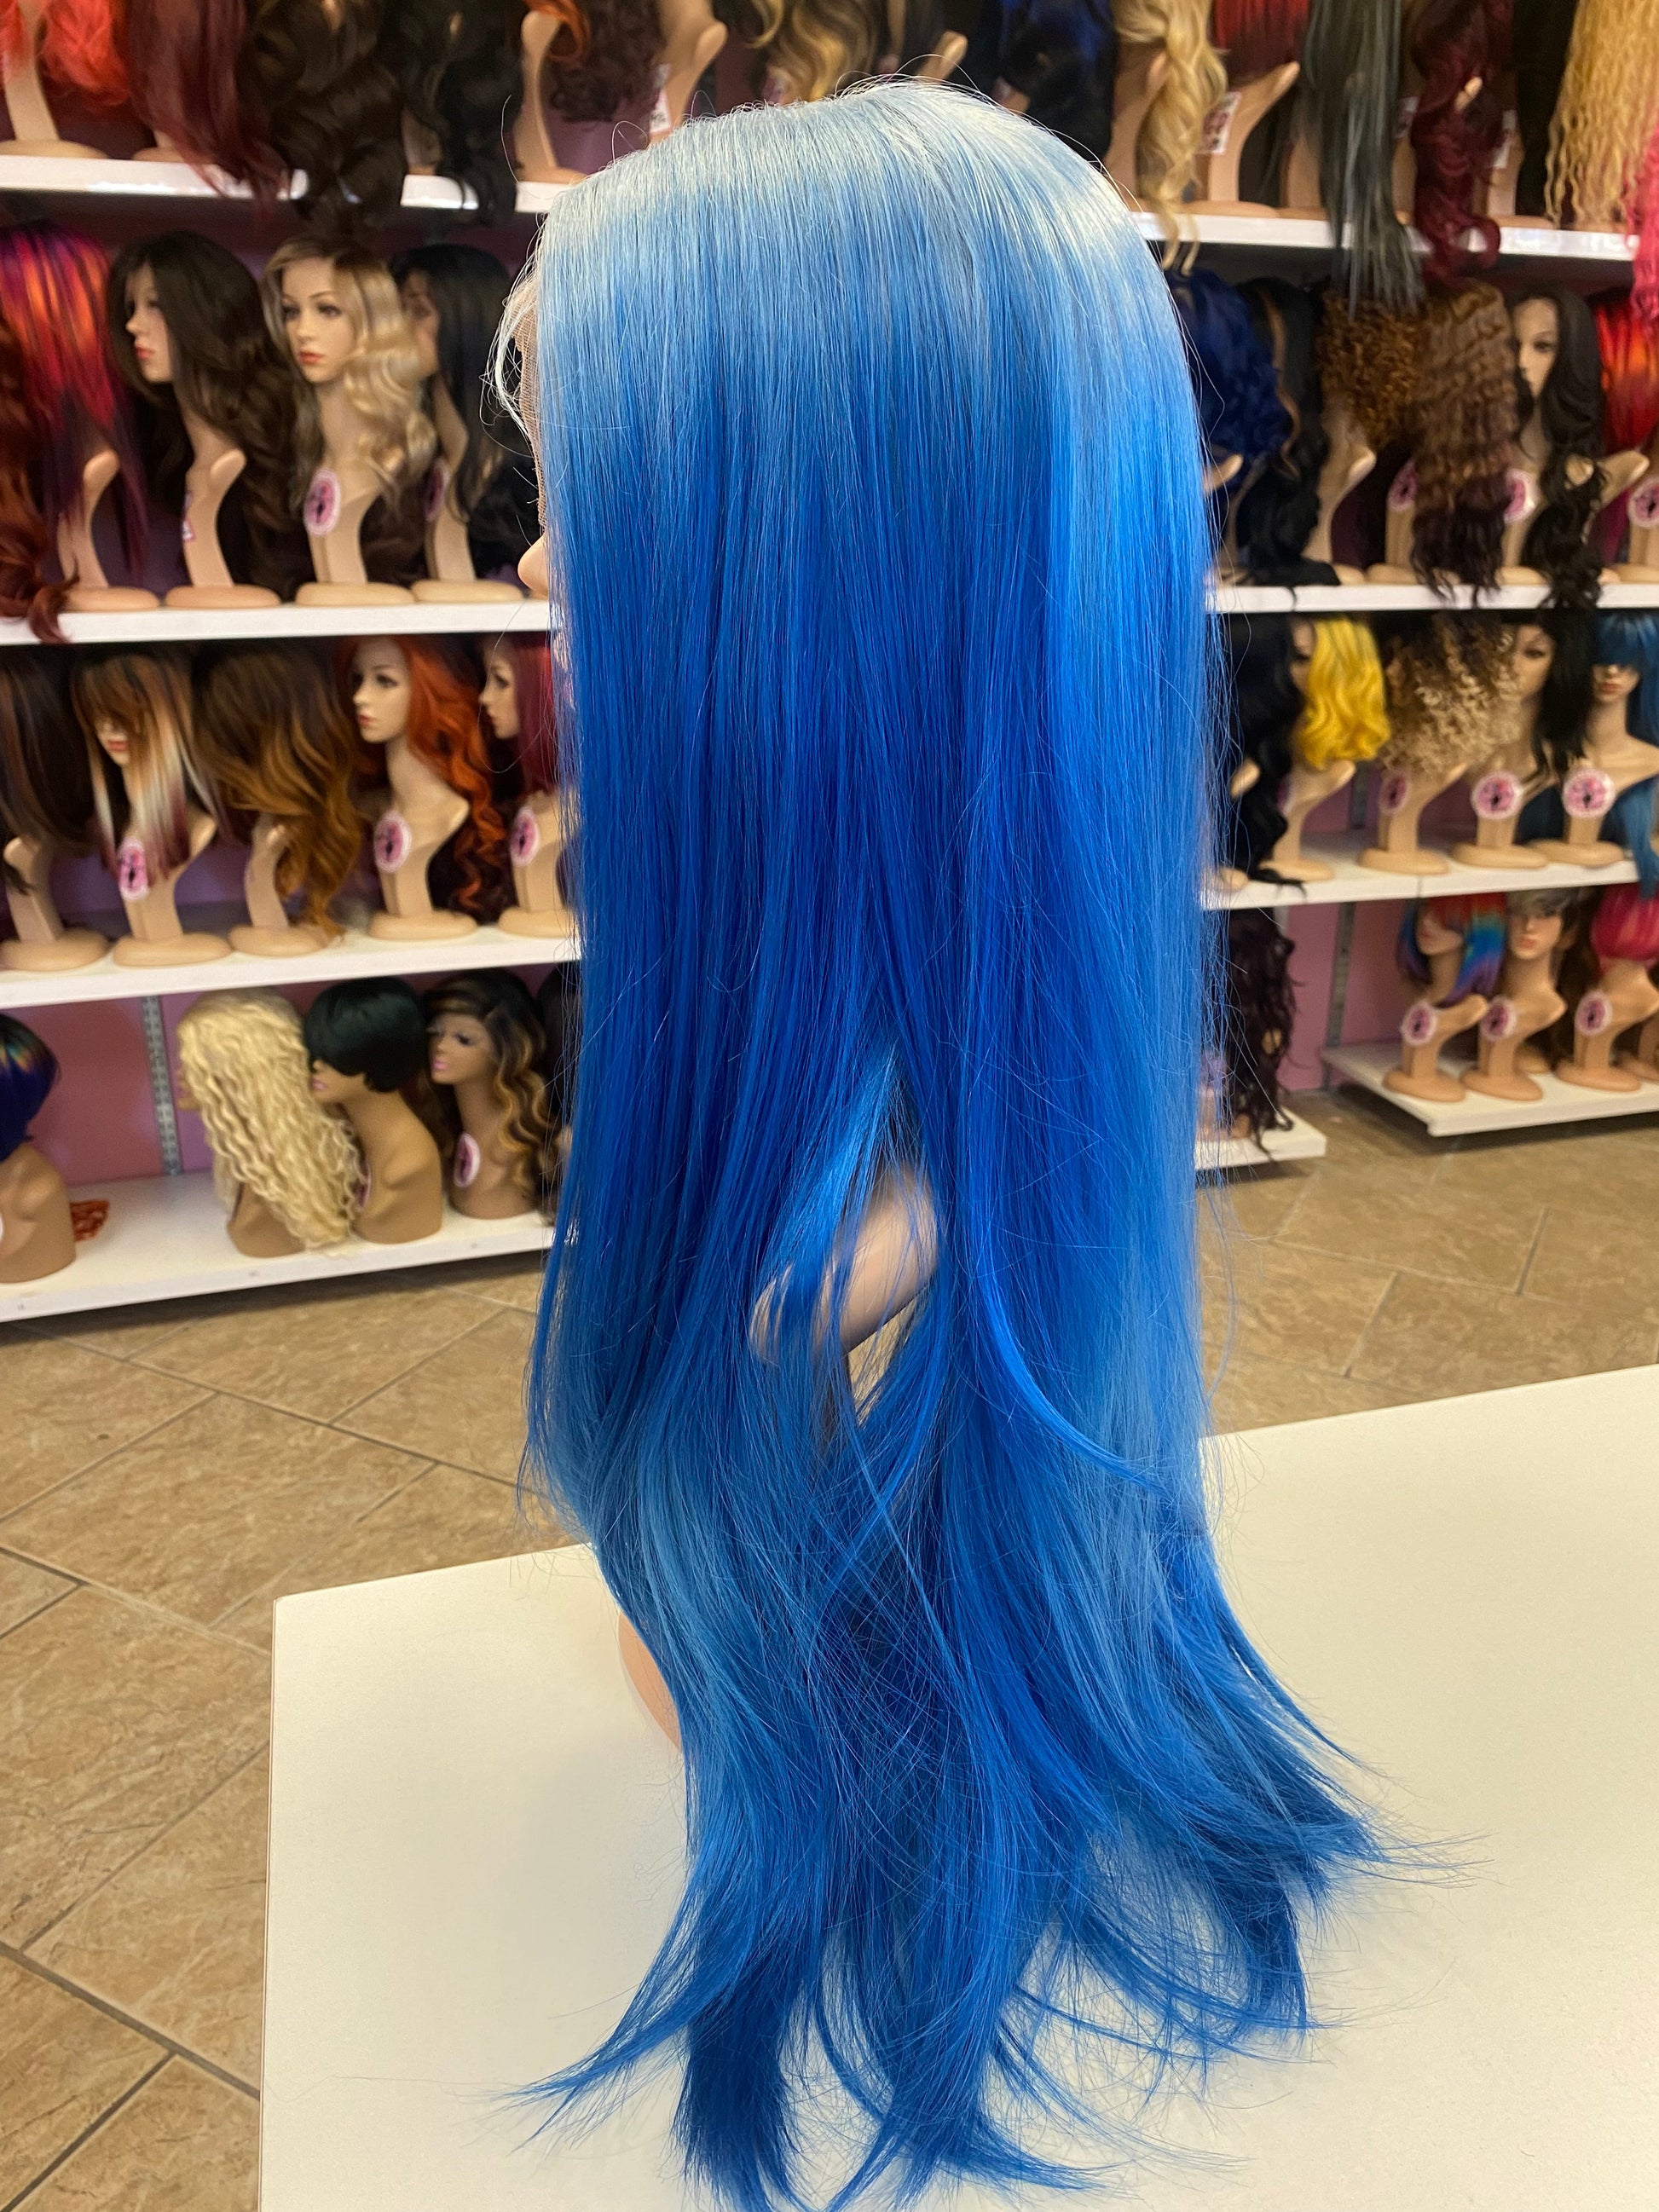 206 Cammi - Deep Middle Part Lace Front Wig - LIGHT BLUE/BLUE - DaizyKat Cosmetics 206 Cammi - Deep Middle Part Lace Front Wig - LIGHT BLUE/BLUE DaizyKat Cosmetics Wigs